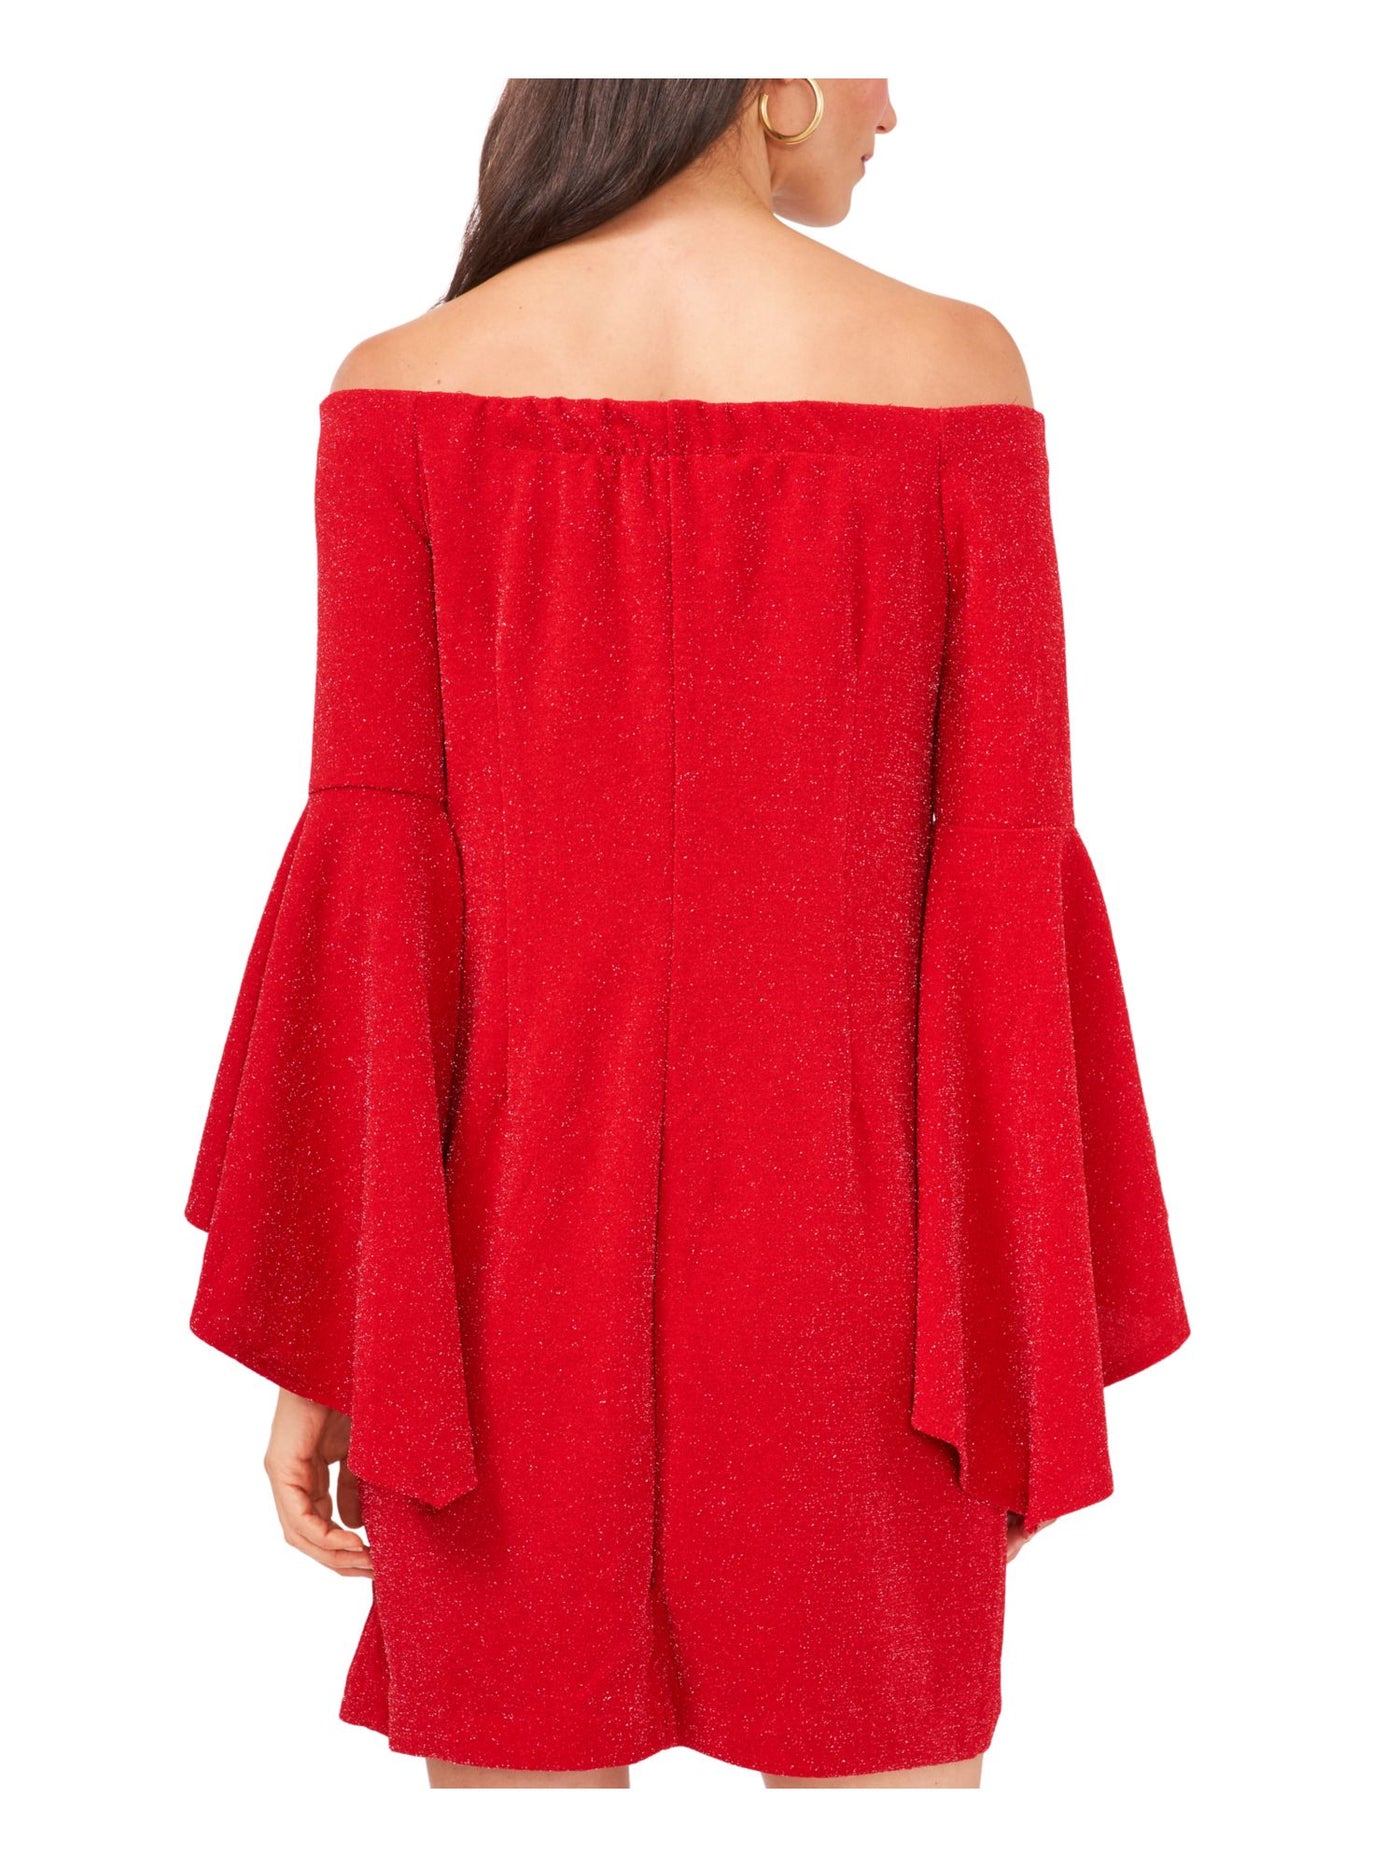 VINCE CAMUTO Womens Red Glitter Pullover Lined Bell Sleeve Off Shoulder Short Cocktail Shift Dress M